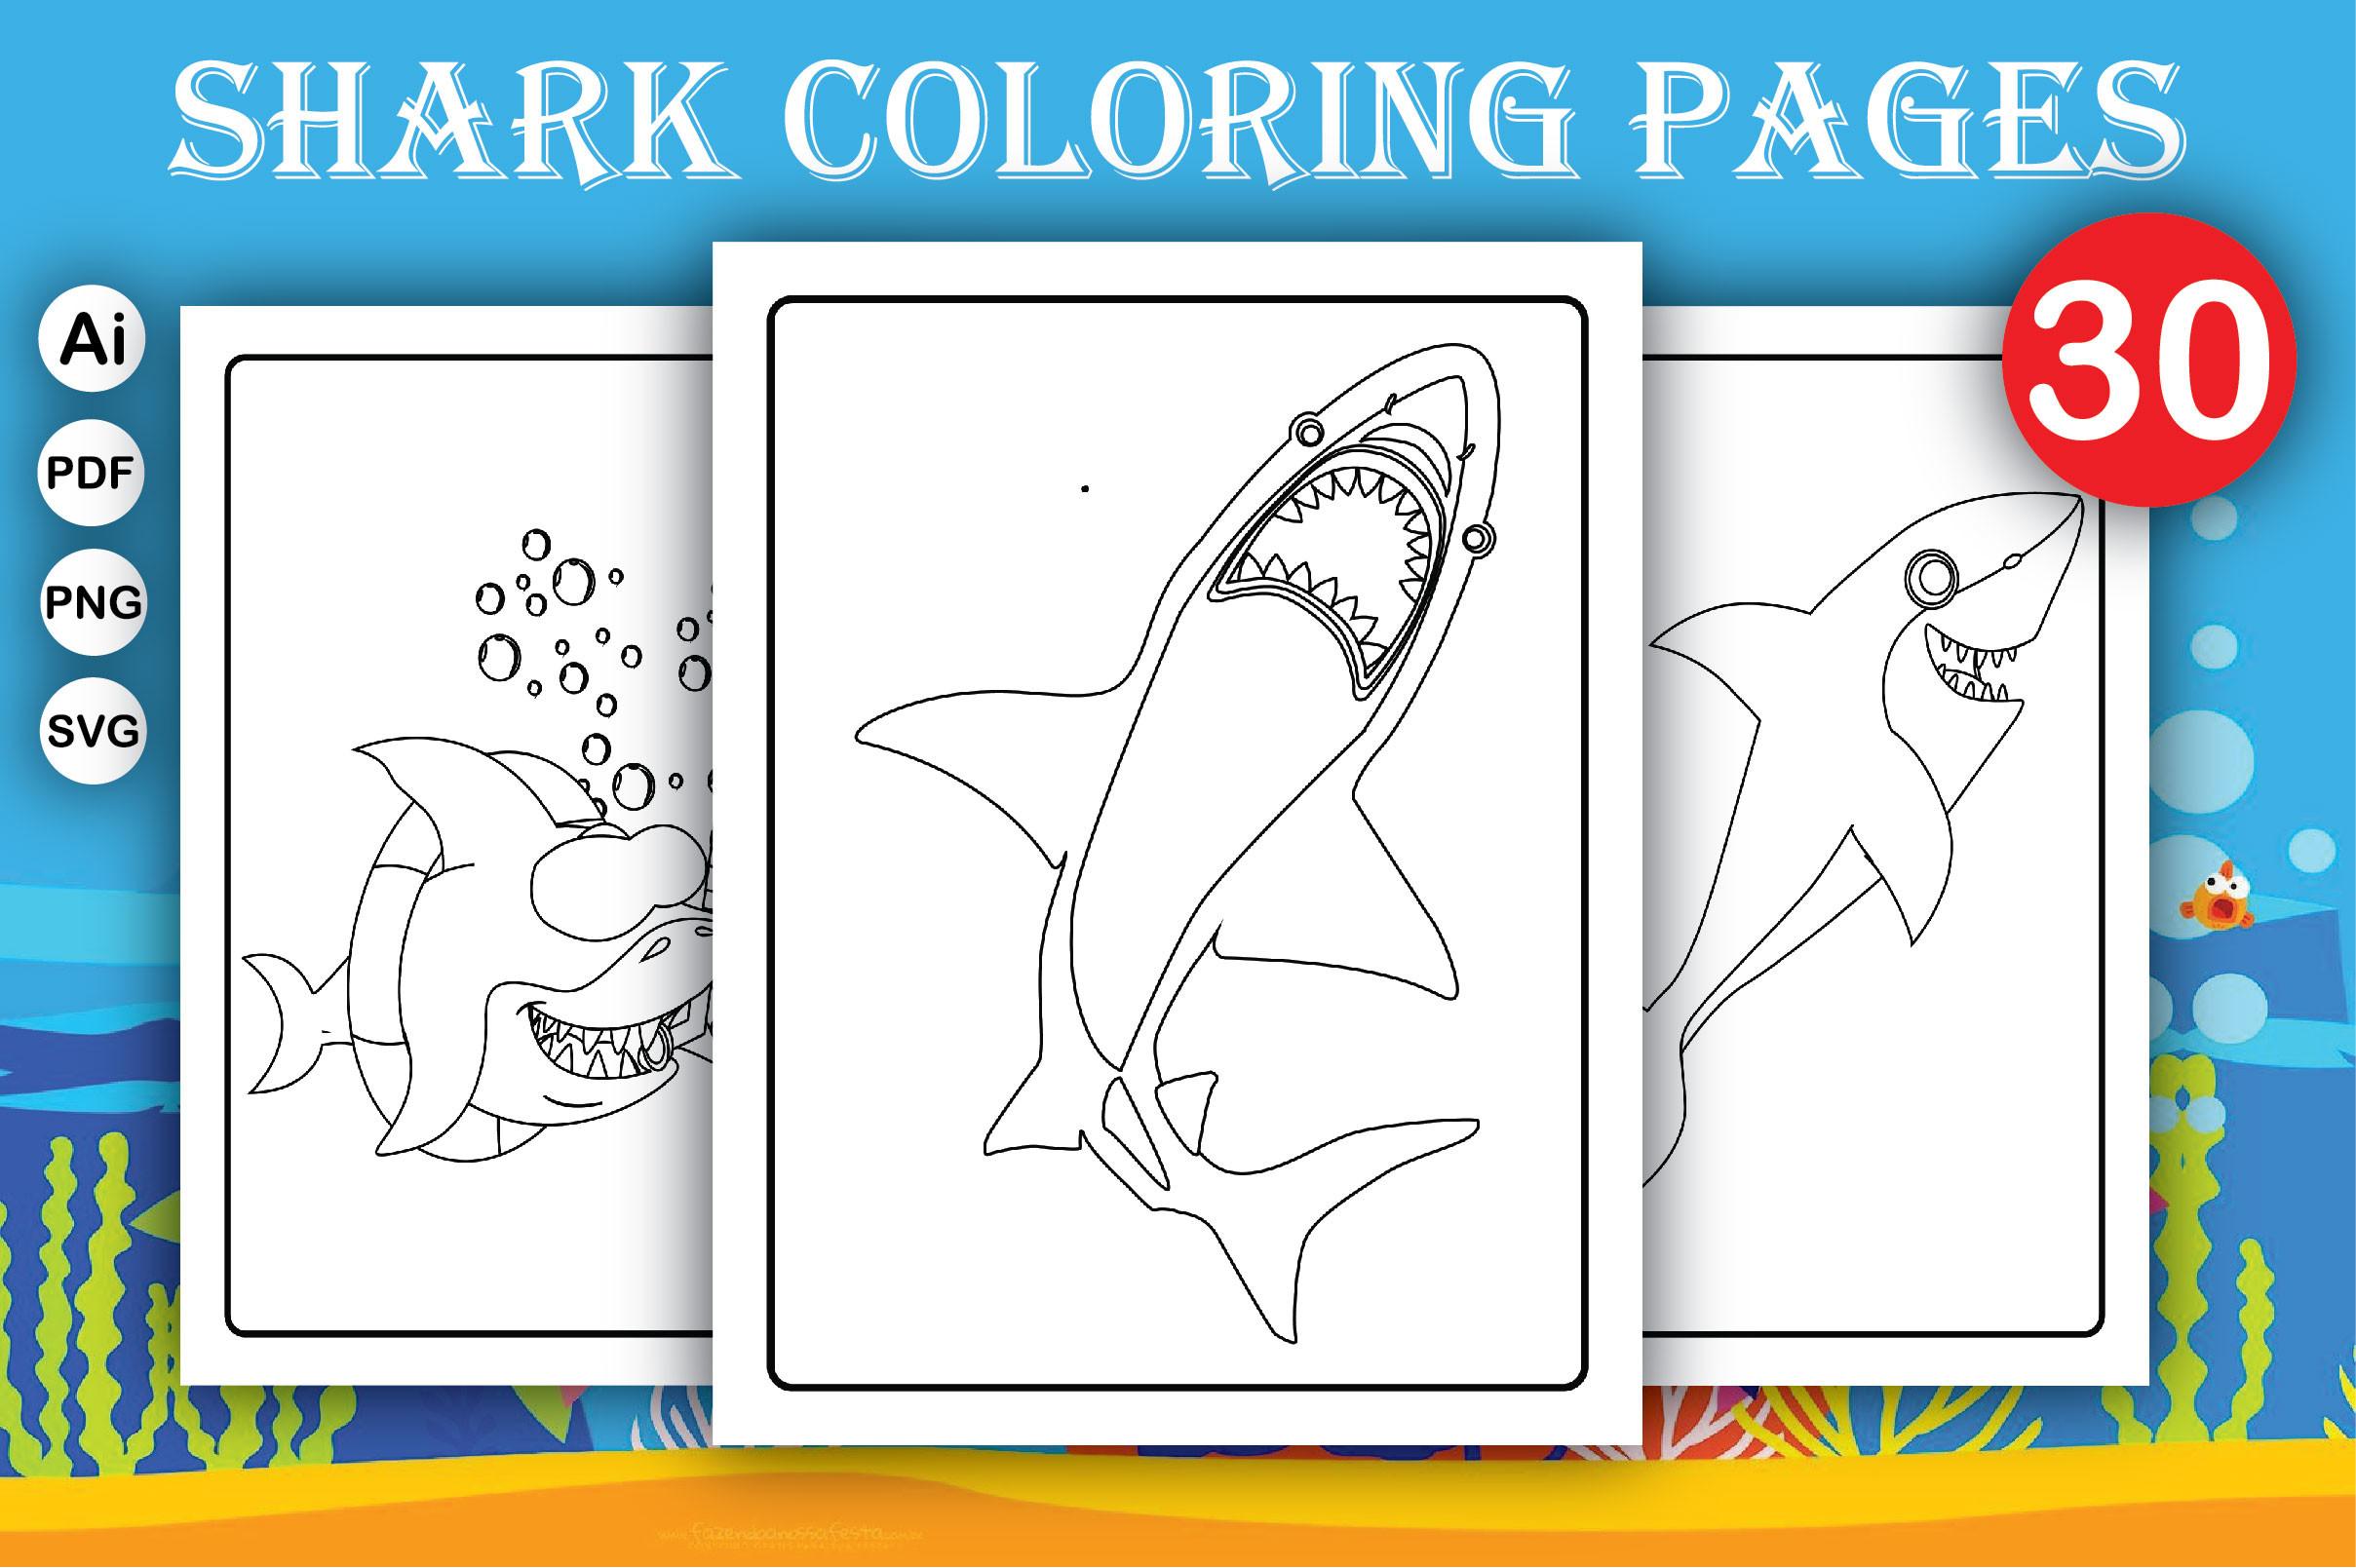 Shark Coloring Pages & Books for Kids